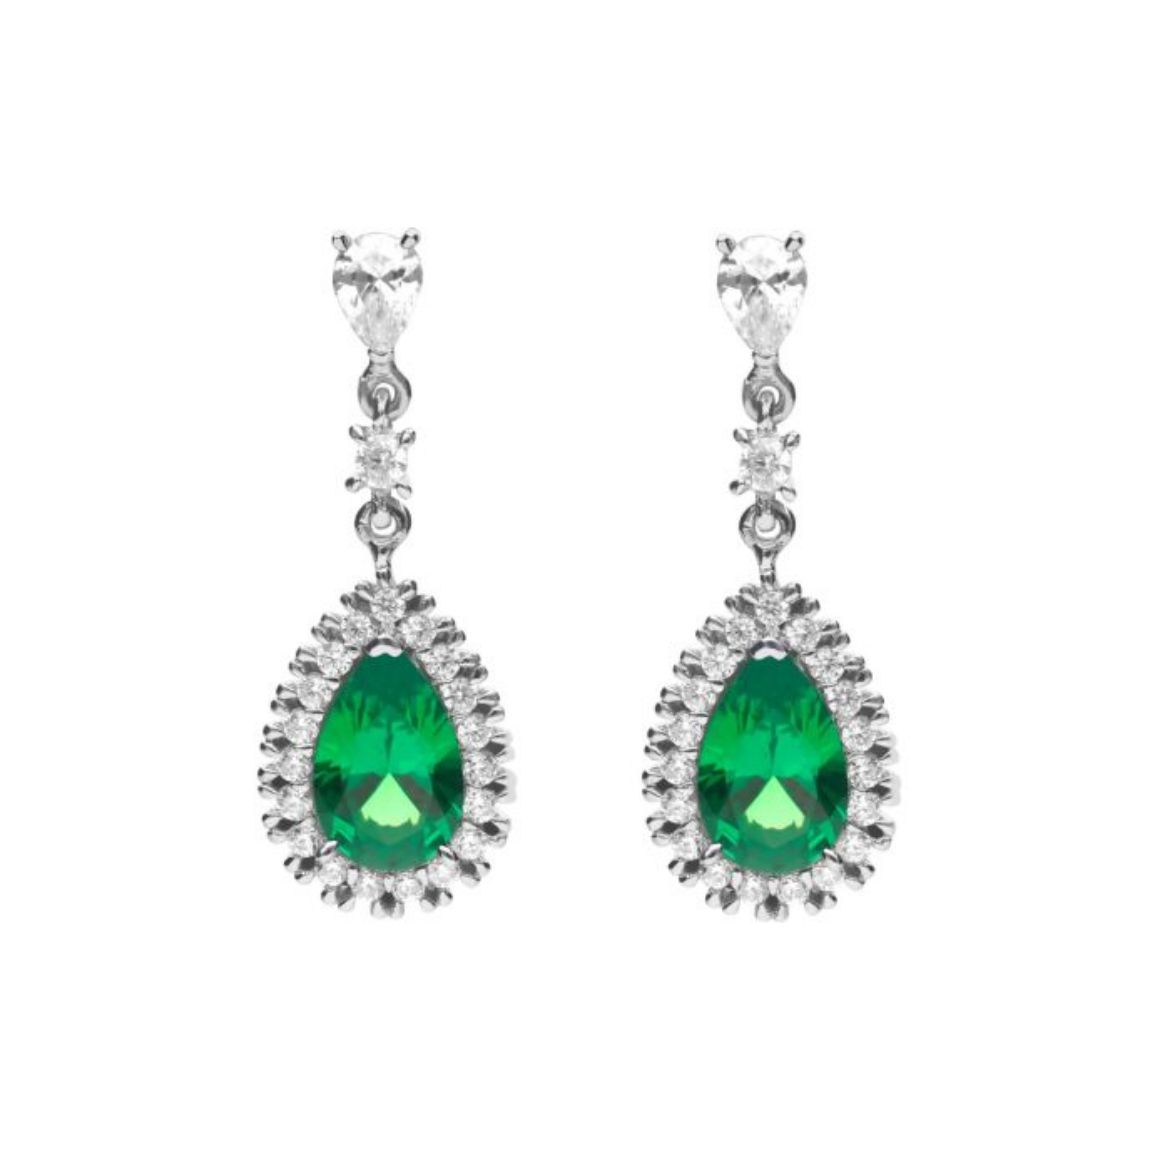 Picture of Teardrop and Pave Surround Earrings